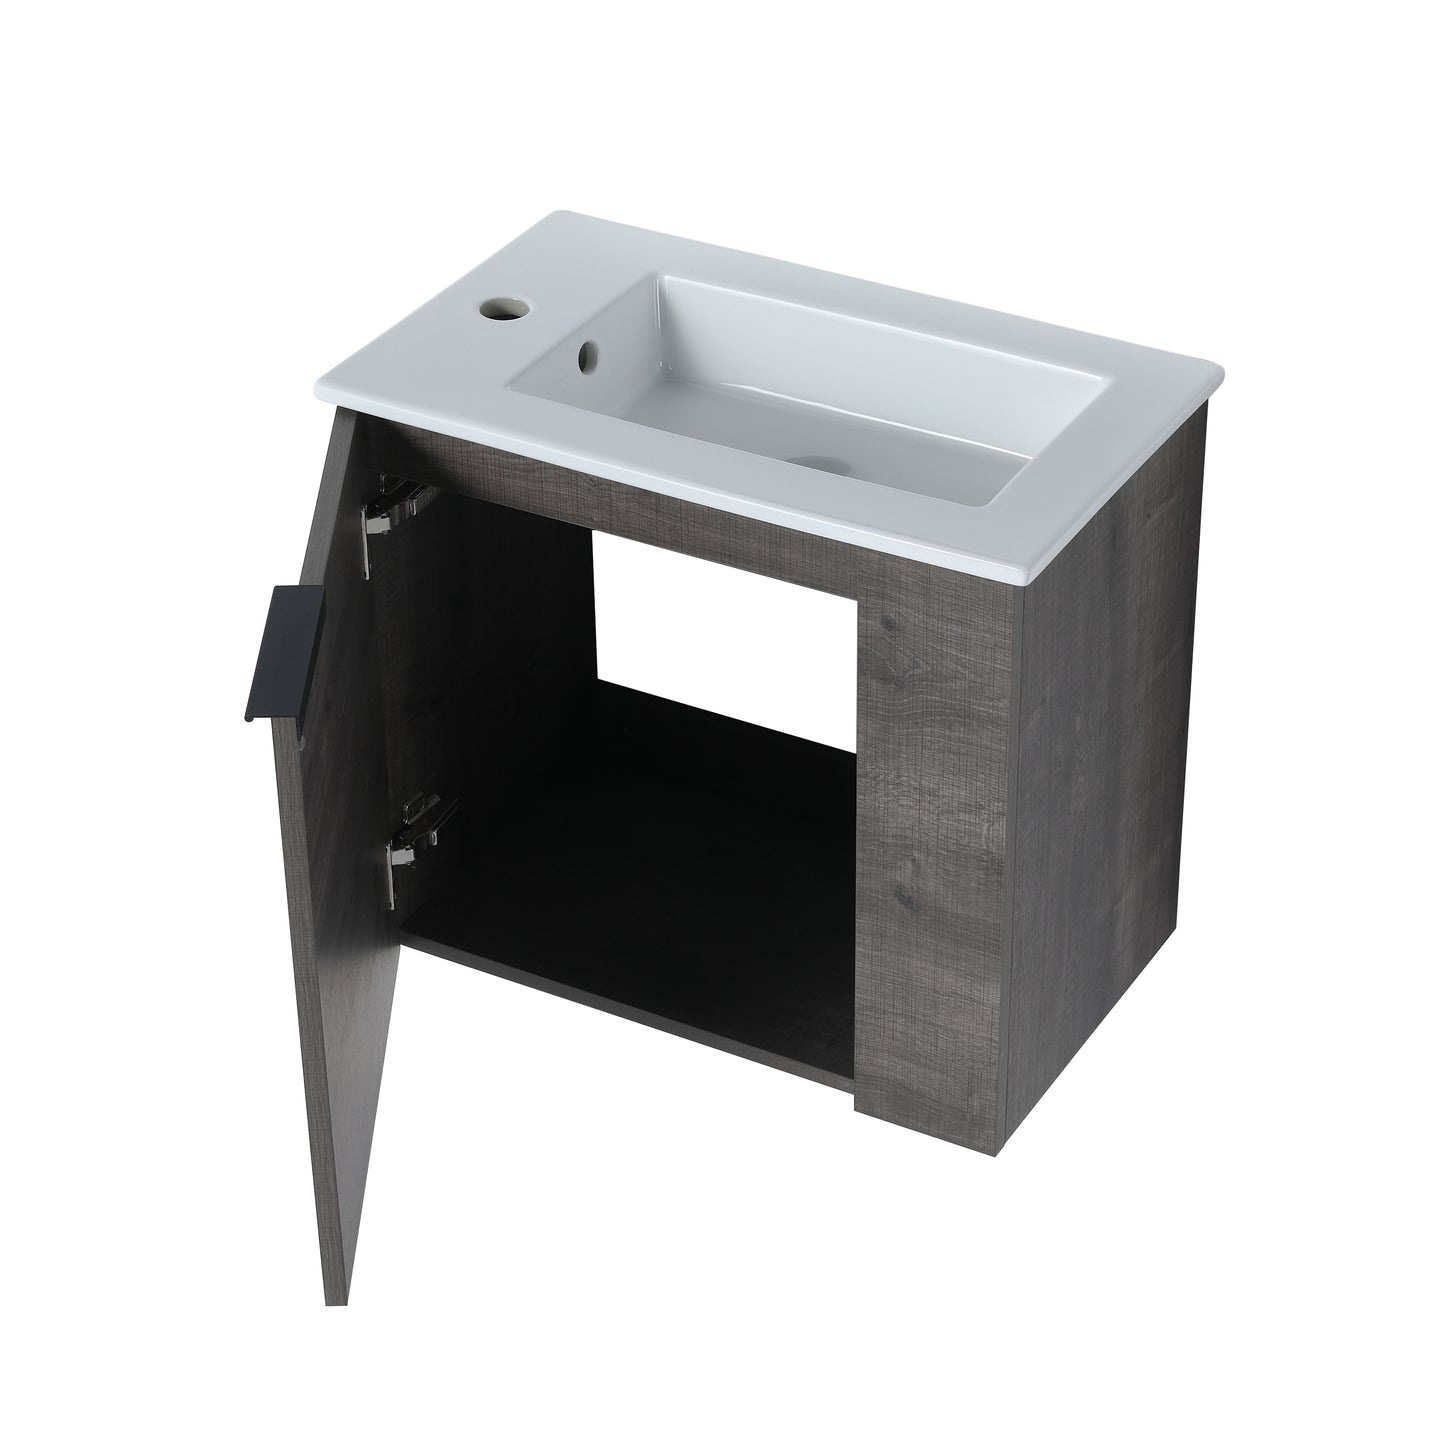 Bathroom Vanity with Sink 22 Inch for Small Bathroom,Floating Bathroom Vanity with Soft Close Door,Small Bathroom Vanity with Sink, 22x13 （KD-Packing）